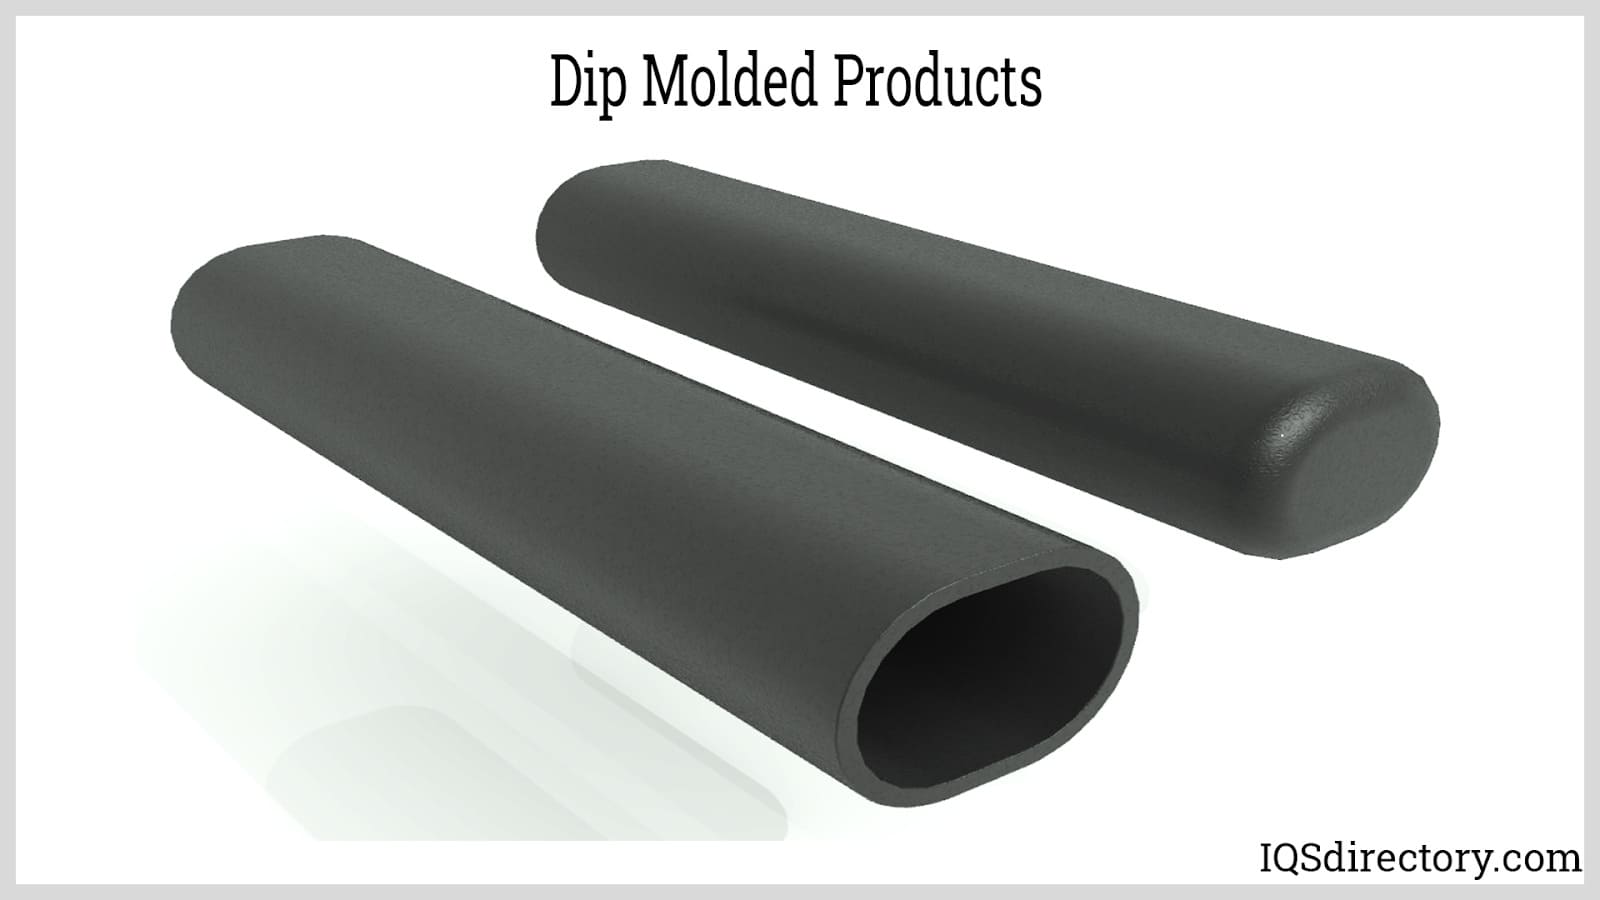 Dip Molded Products